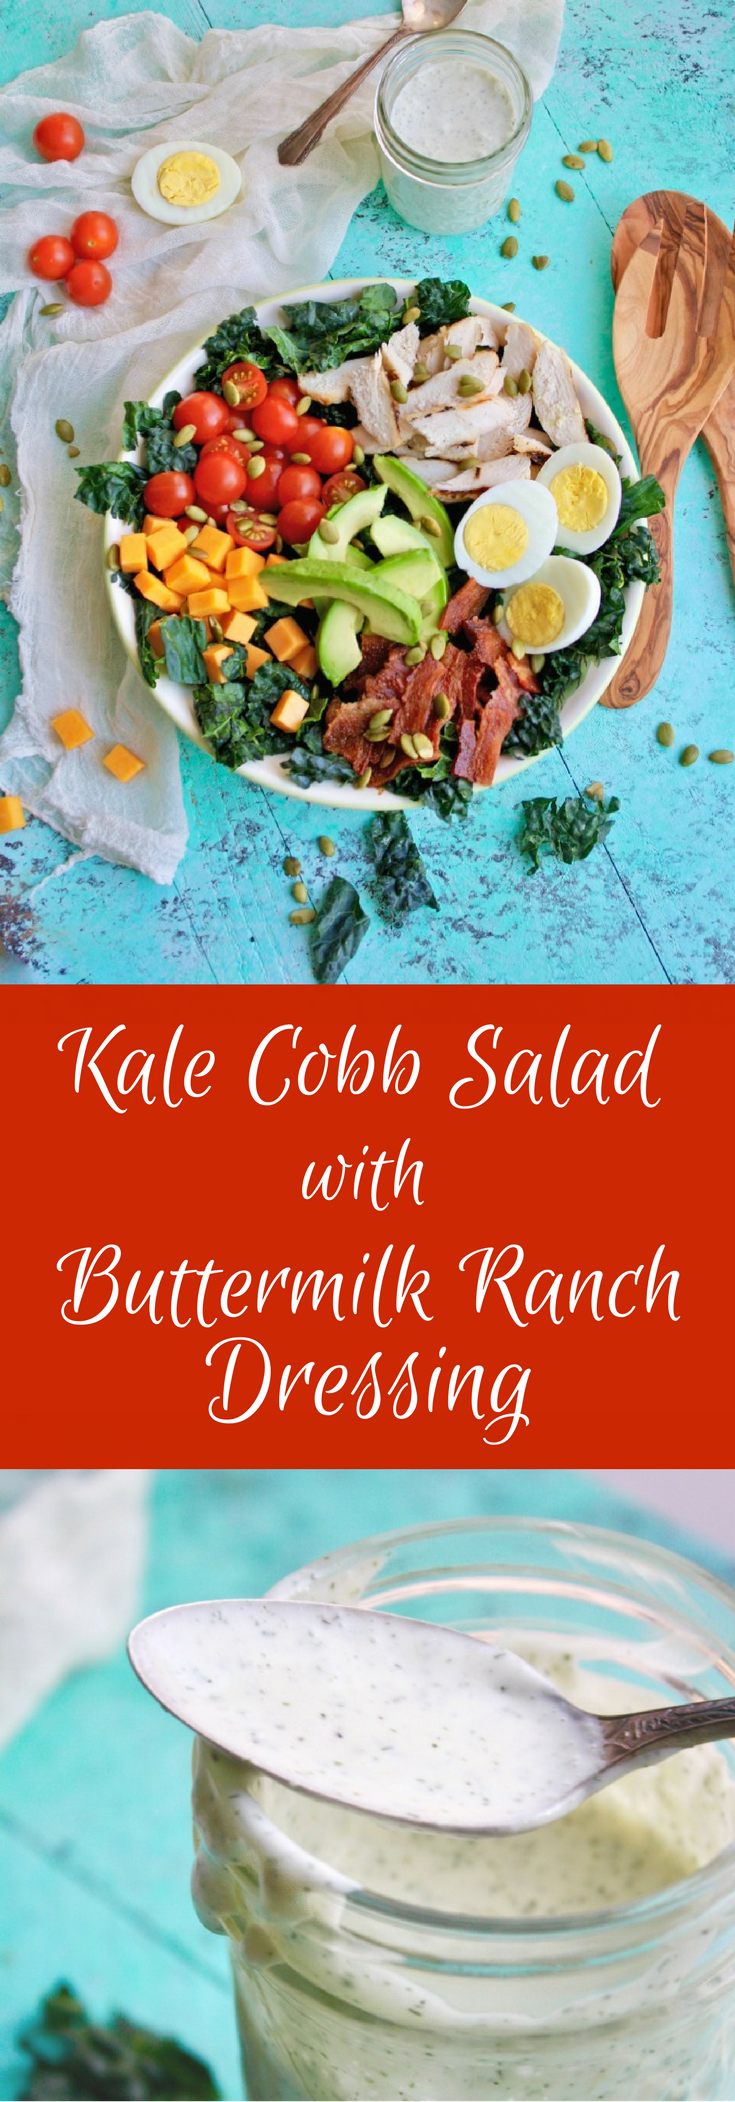 Sometimes a hearty salad is just what you need! Kale Cobb Salad with Buttermilk Ranch Dressing fills the bill!